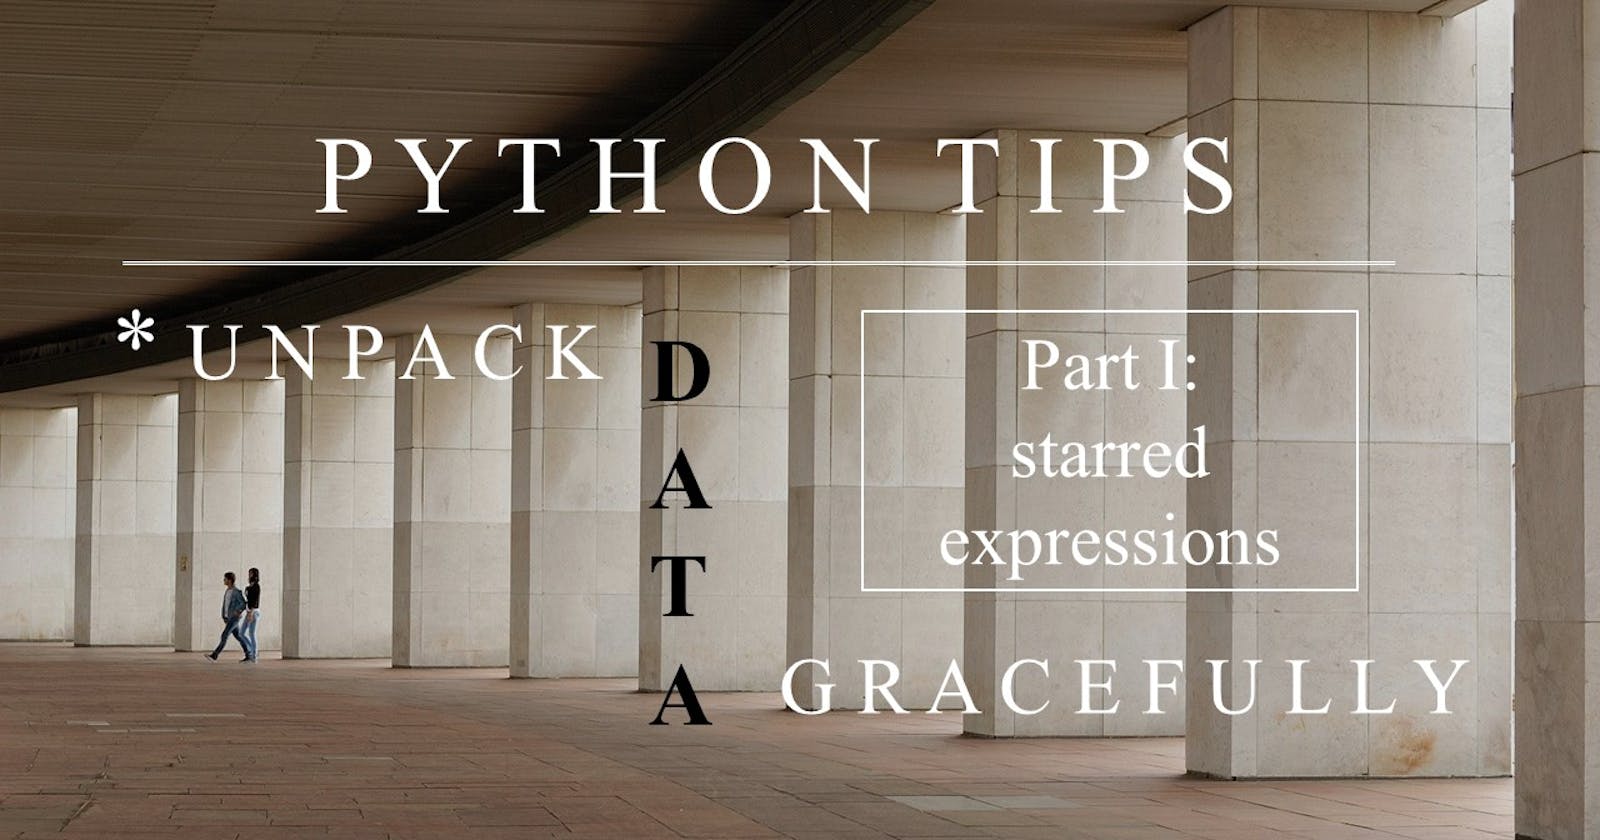 Python tips: unpack data gracefully with starred expressions